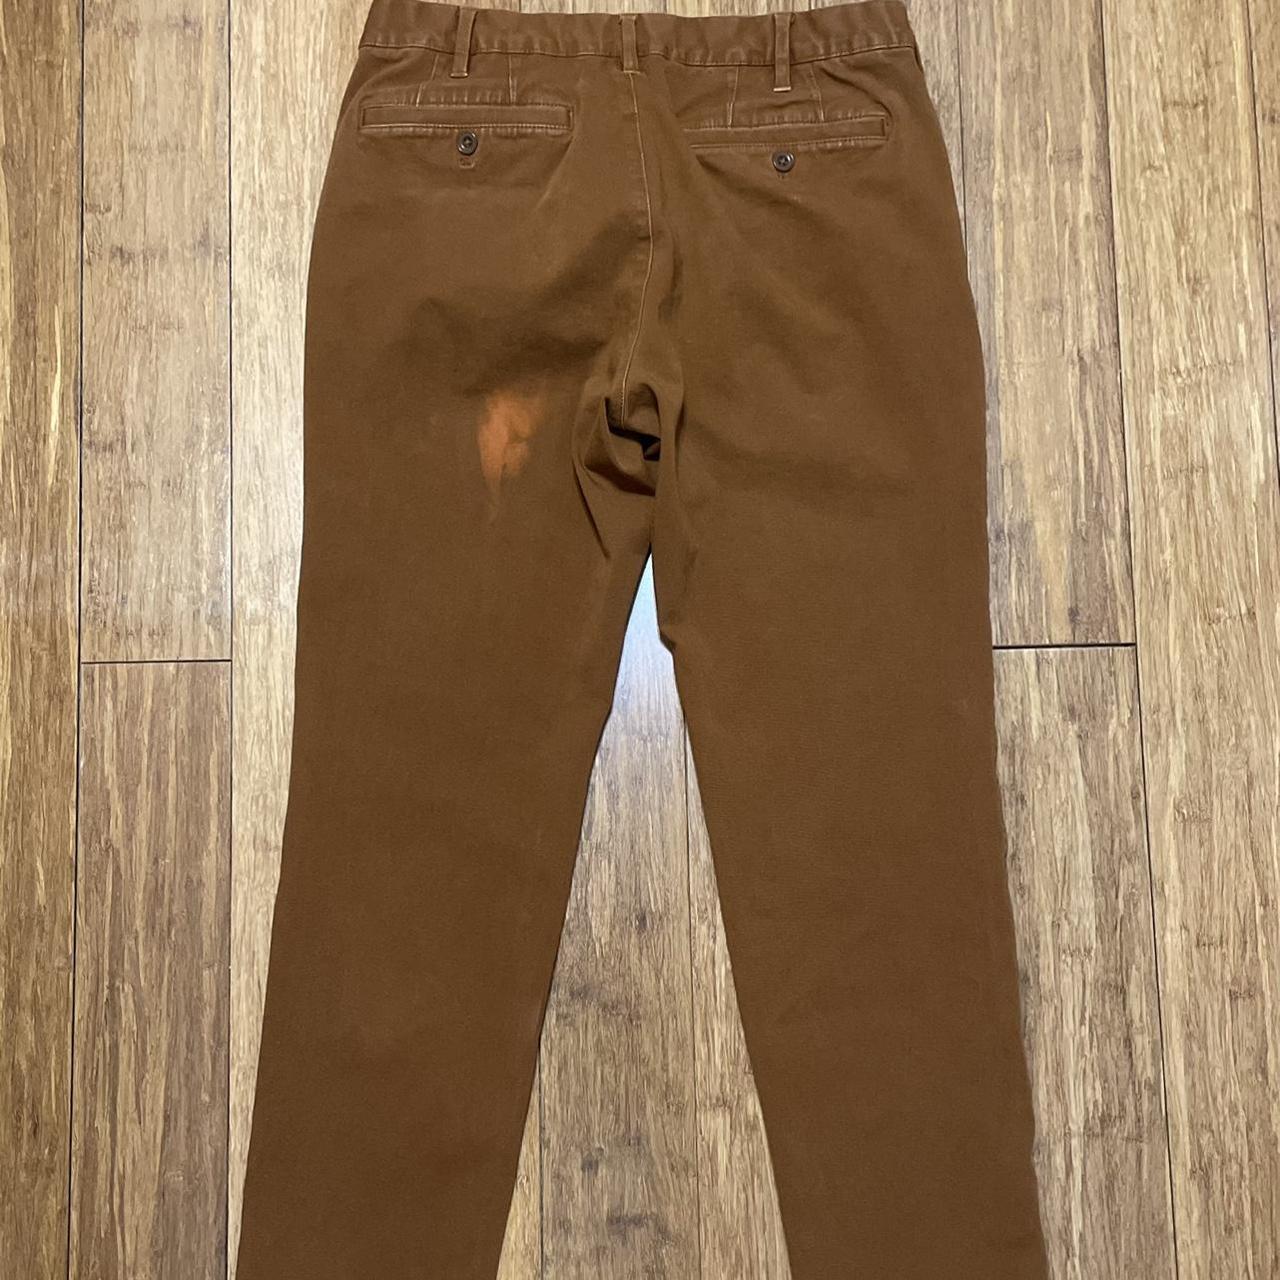 Uniqlo Slim Fit Chino Review  Thither